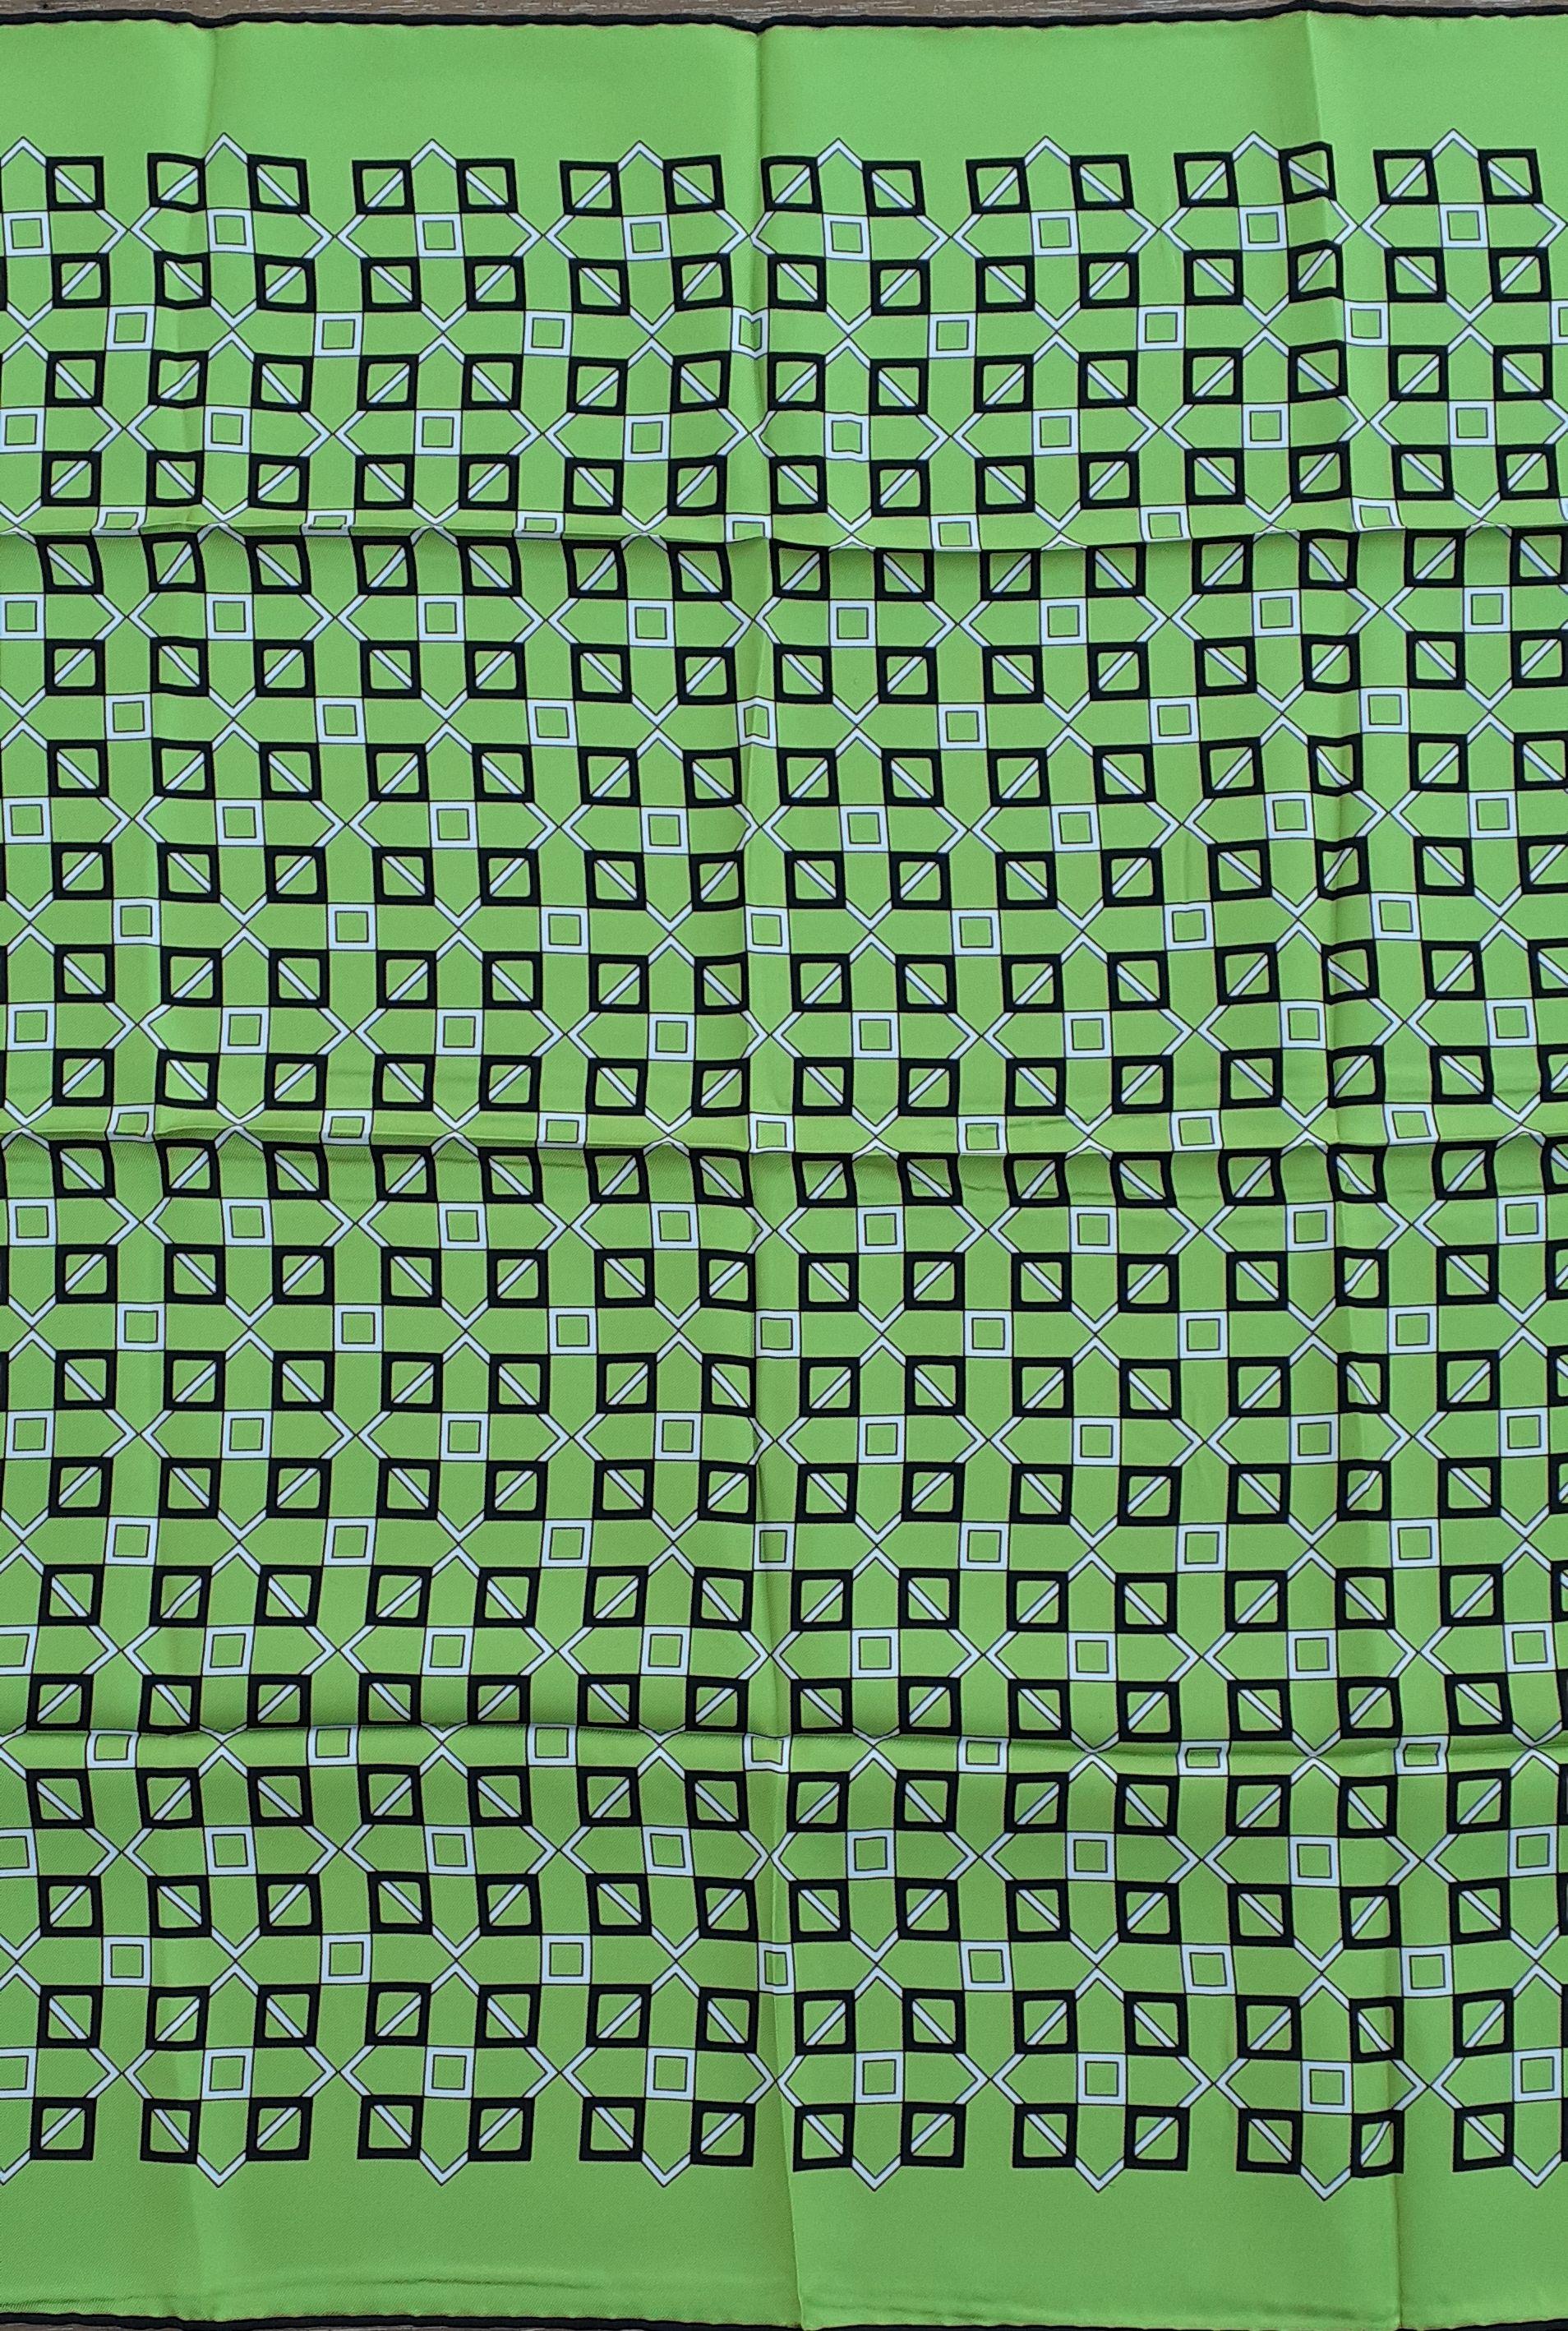 Beautiful Authentic Hermès Scarf

Geometric prints (squares)

From the men's collection; can fit both men and women

Made in France

Made of 100% Silk

Colorways: Apple Green background (more vibrant than photos show), White and Black